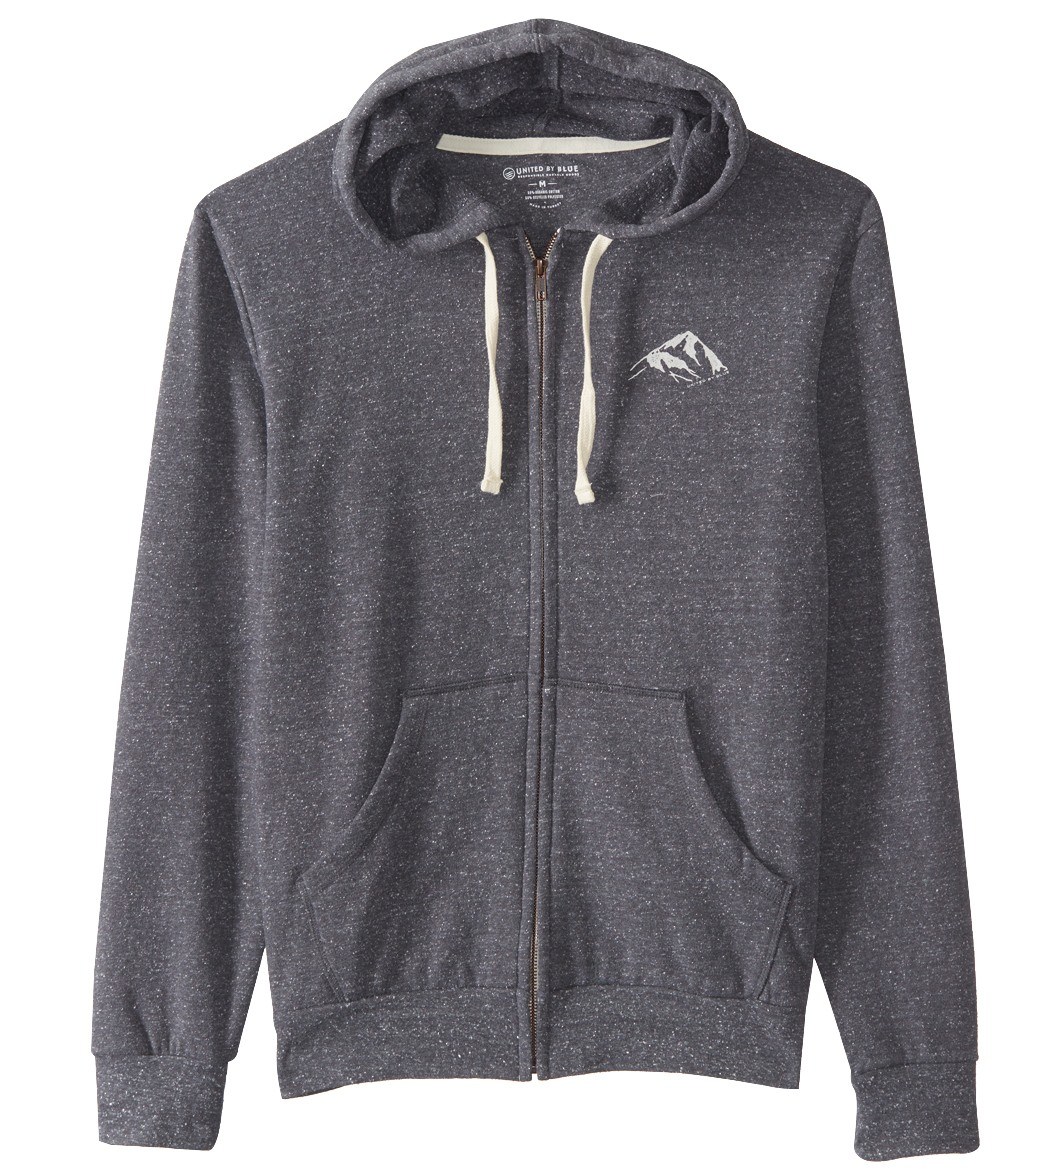 United By Blue Men's Made For The Mountains Zip Up Hoodie - Charcoal Medium Cotton/Polyester - Swimoutlet.com